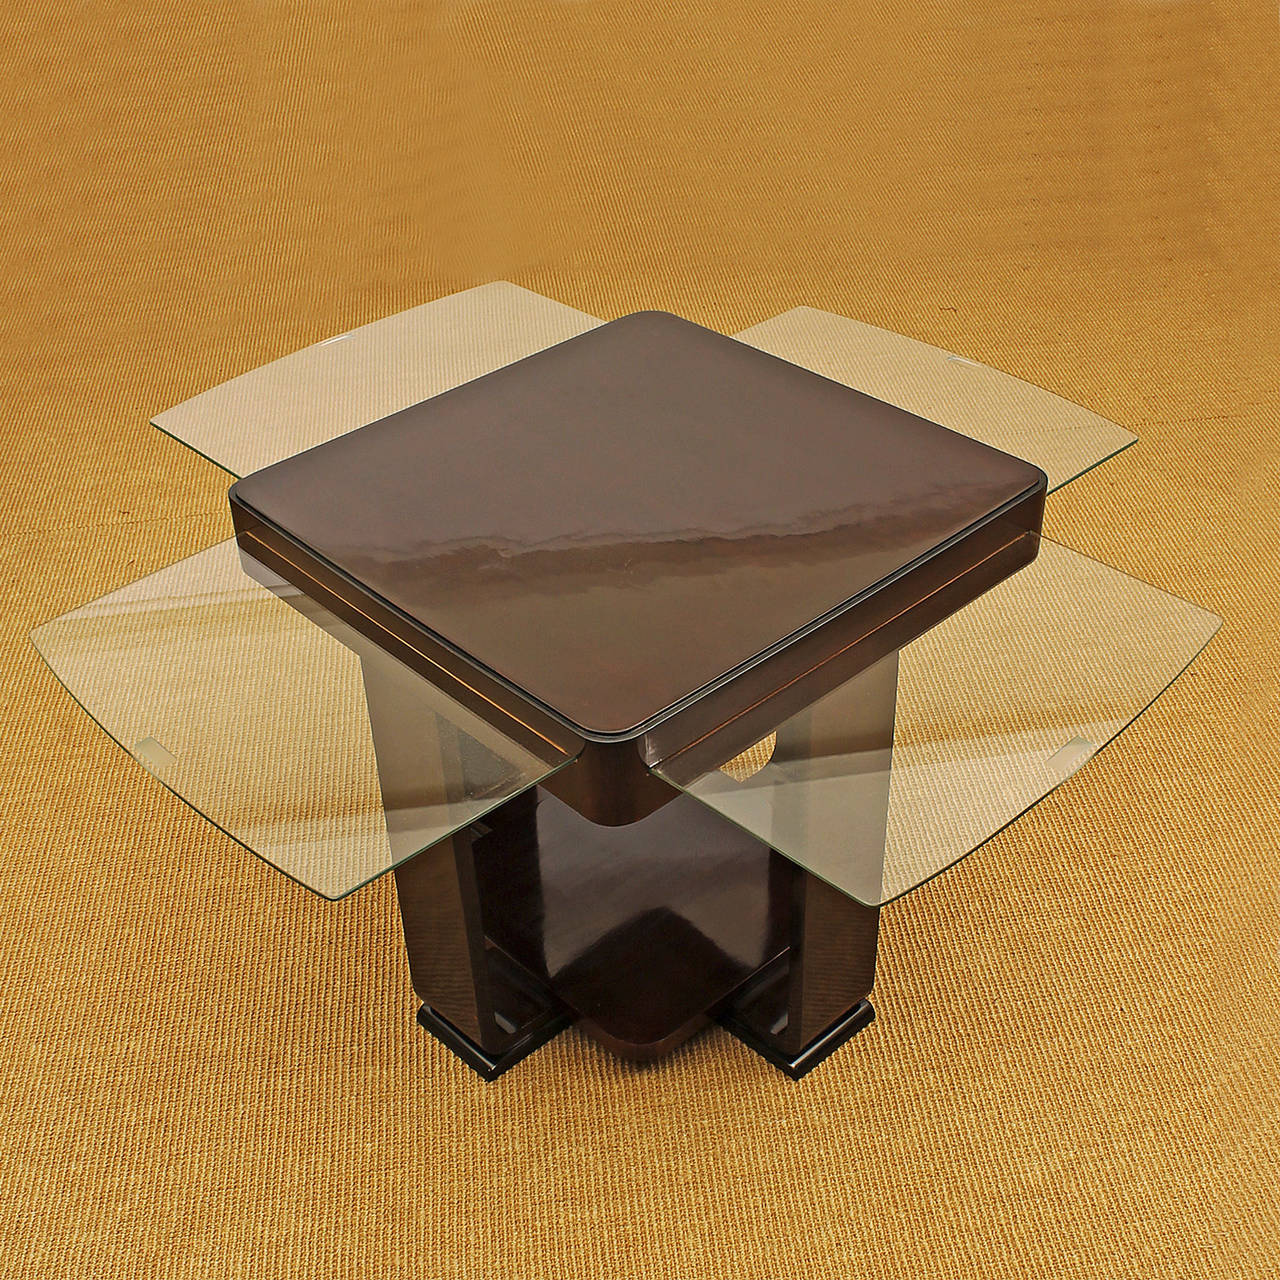 Art Deco square sidetable, stained mahogany, 4 small glass sliding boards.
Belgium 1930 - 35

Boards open 26 cm max.